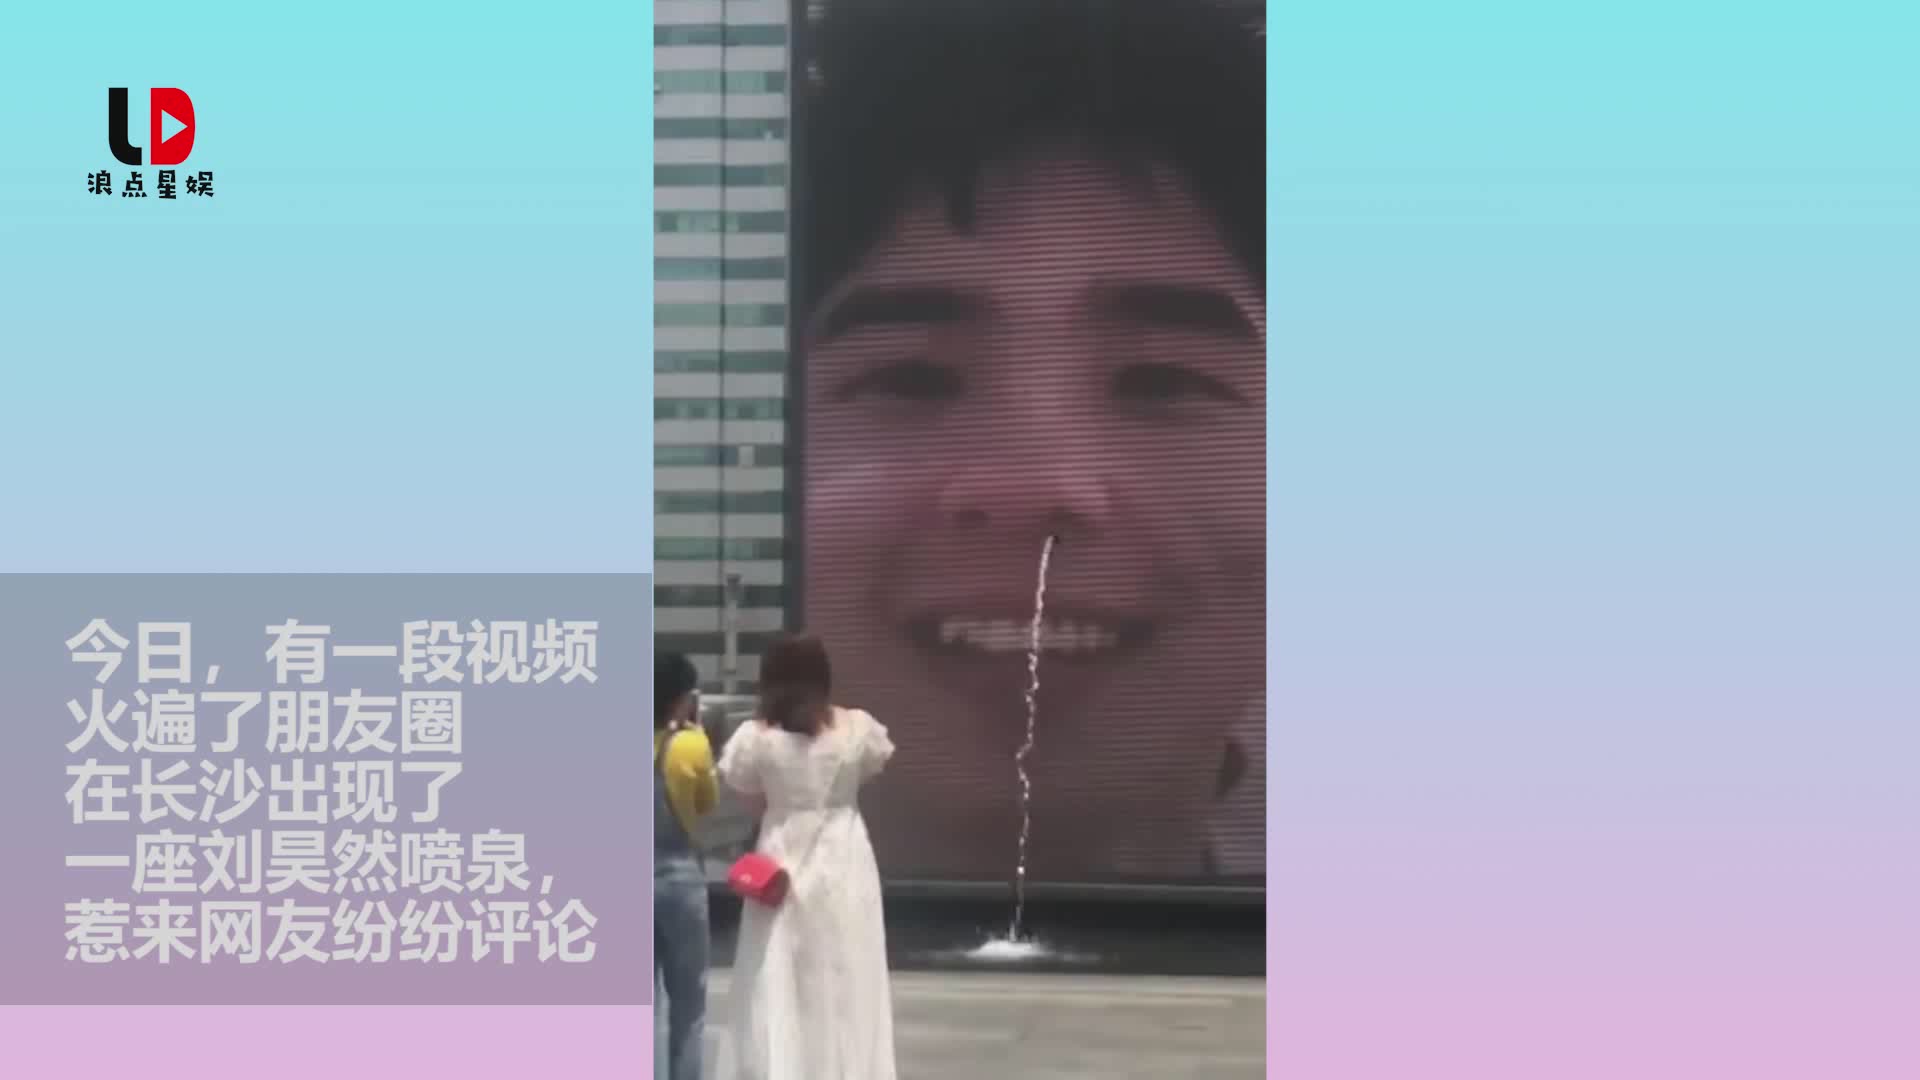 Liu Haoran's nostril fountain, is this the worst time he was black?